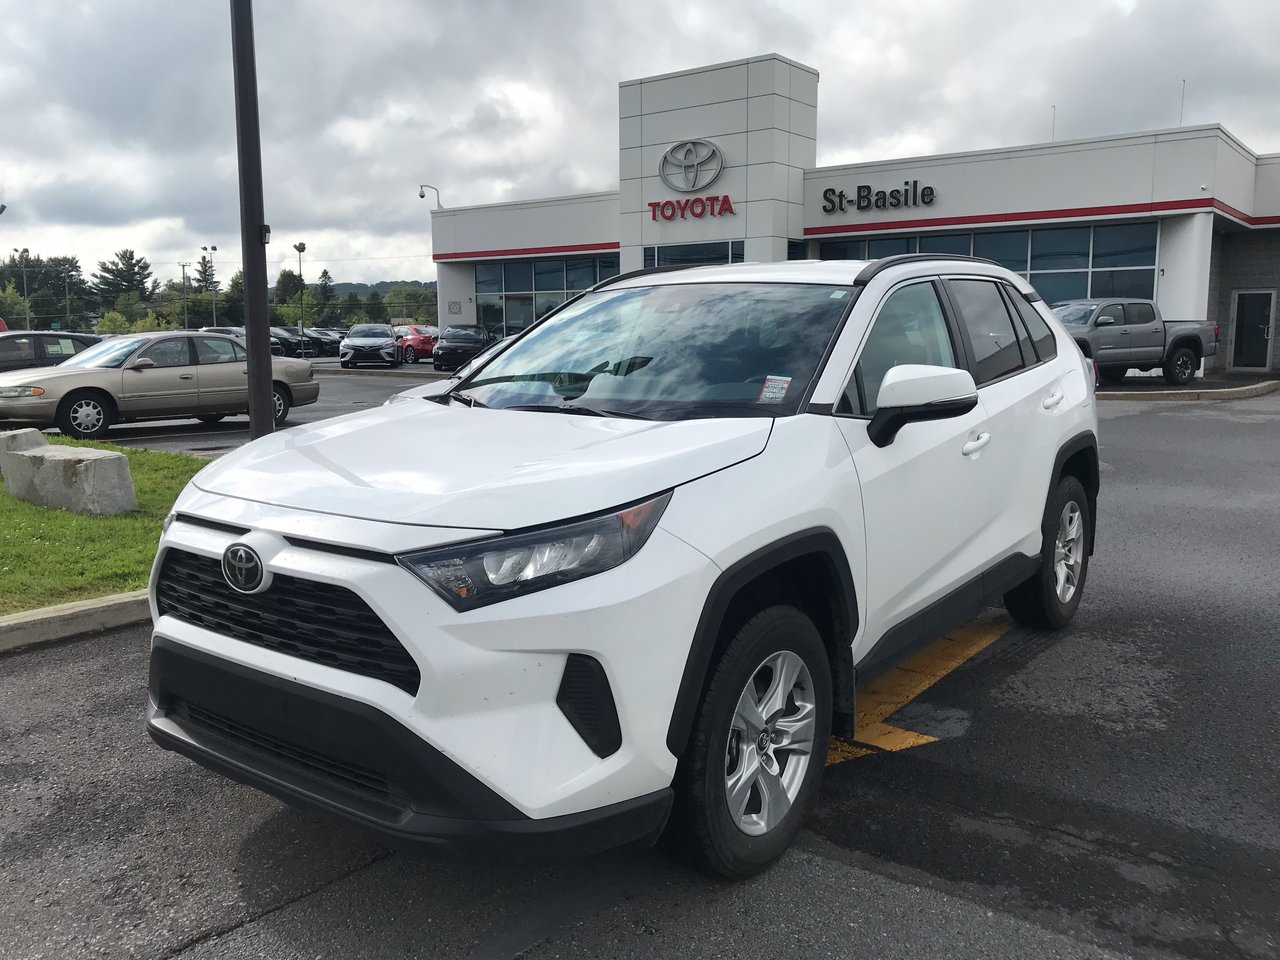  Toyota RAV4 LE AWD MAGS SIEGES